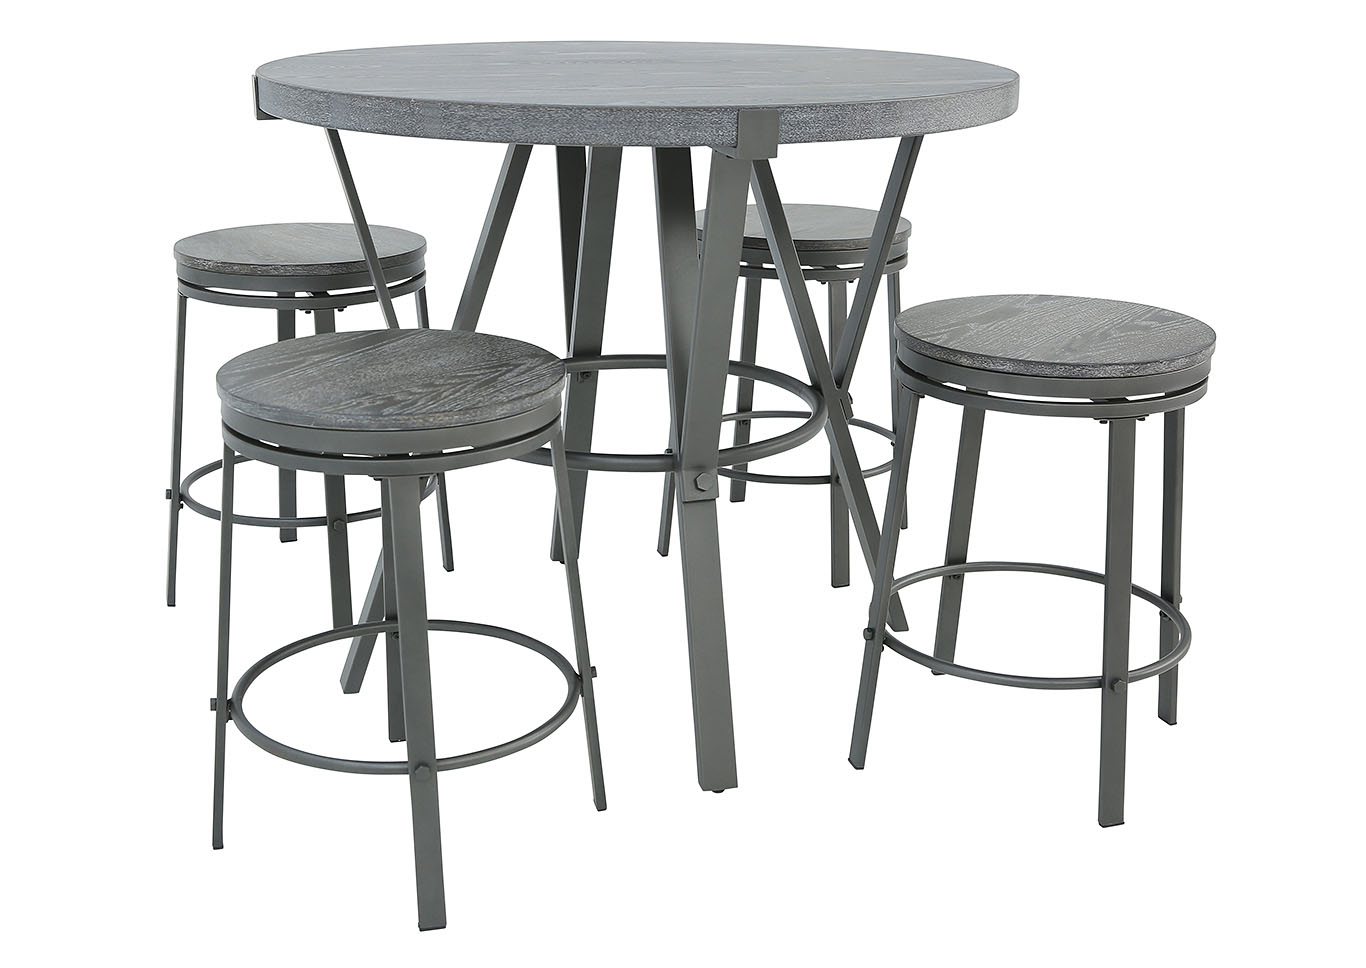 PORTLAND COUNTER HEIGHT DINETTE STOOL,STEVE SILVER COMPANY